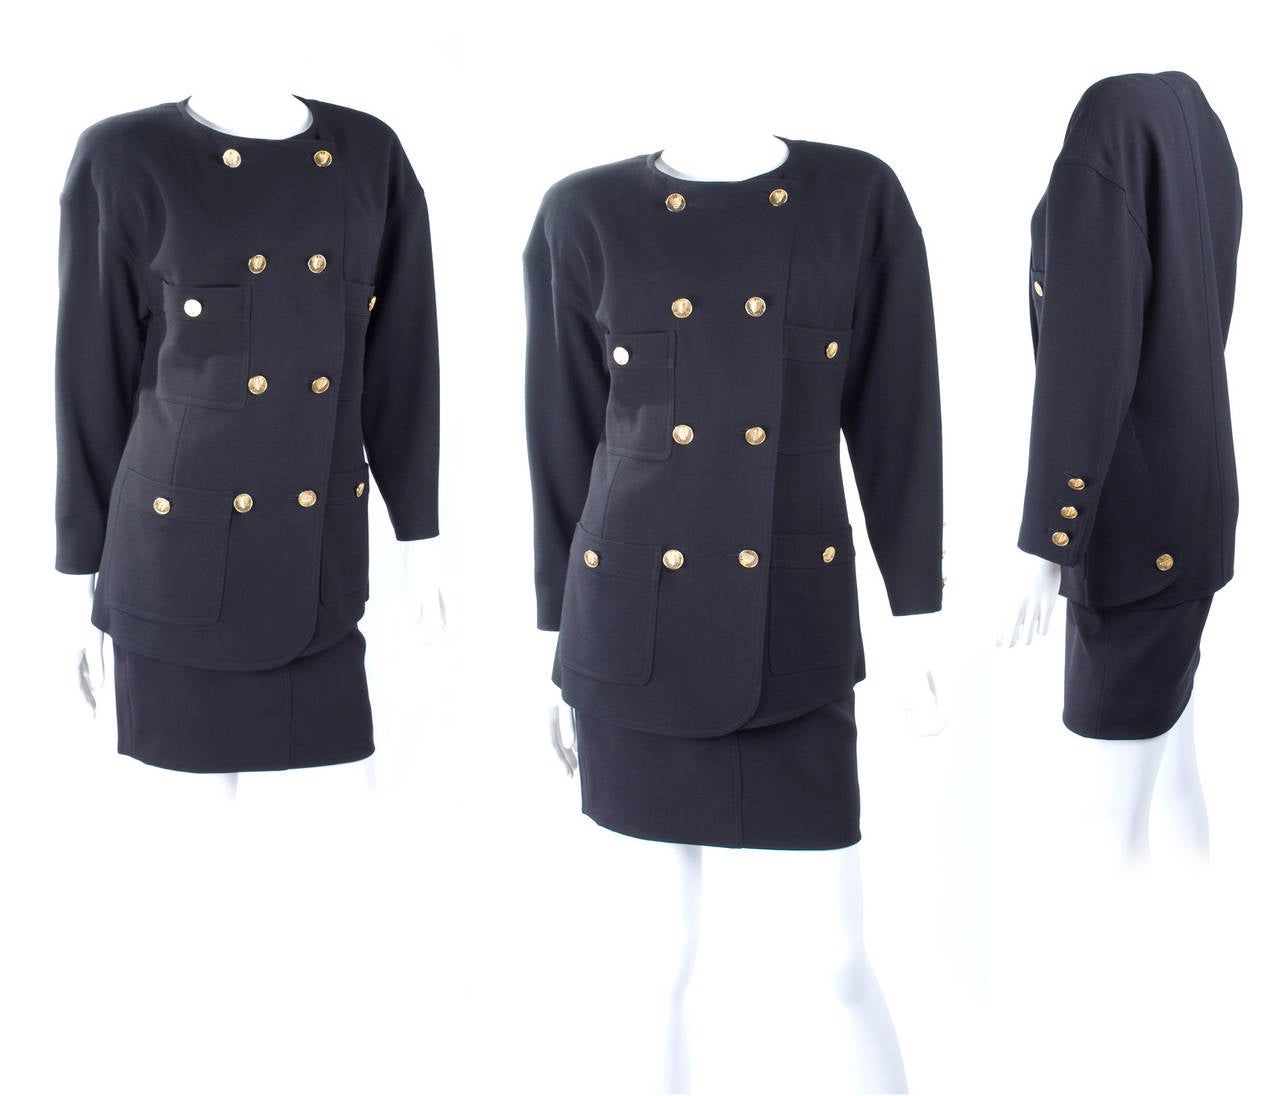 Vintage Chanel suit in black with gold buttons and spike motive.
There are altogether 22 Buttons on this suit.
From circa 1980s
Size EU 38
Excellent condition - no flaws to mention.
Measurements:
Jacket: Length 26.5